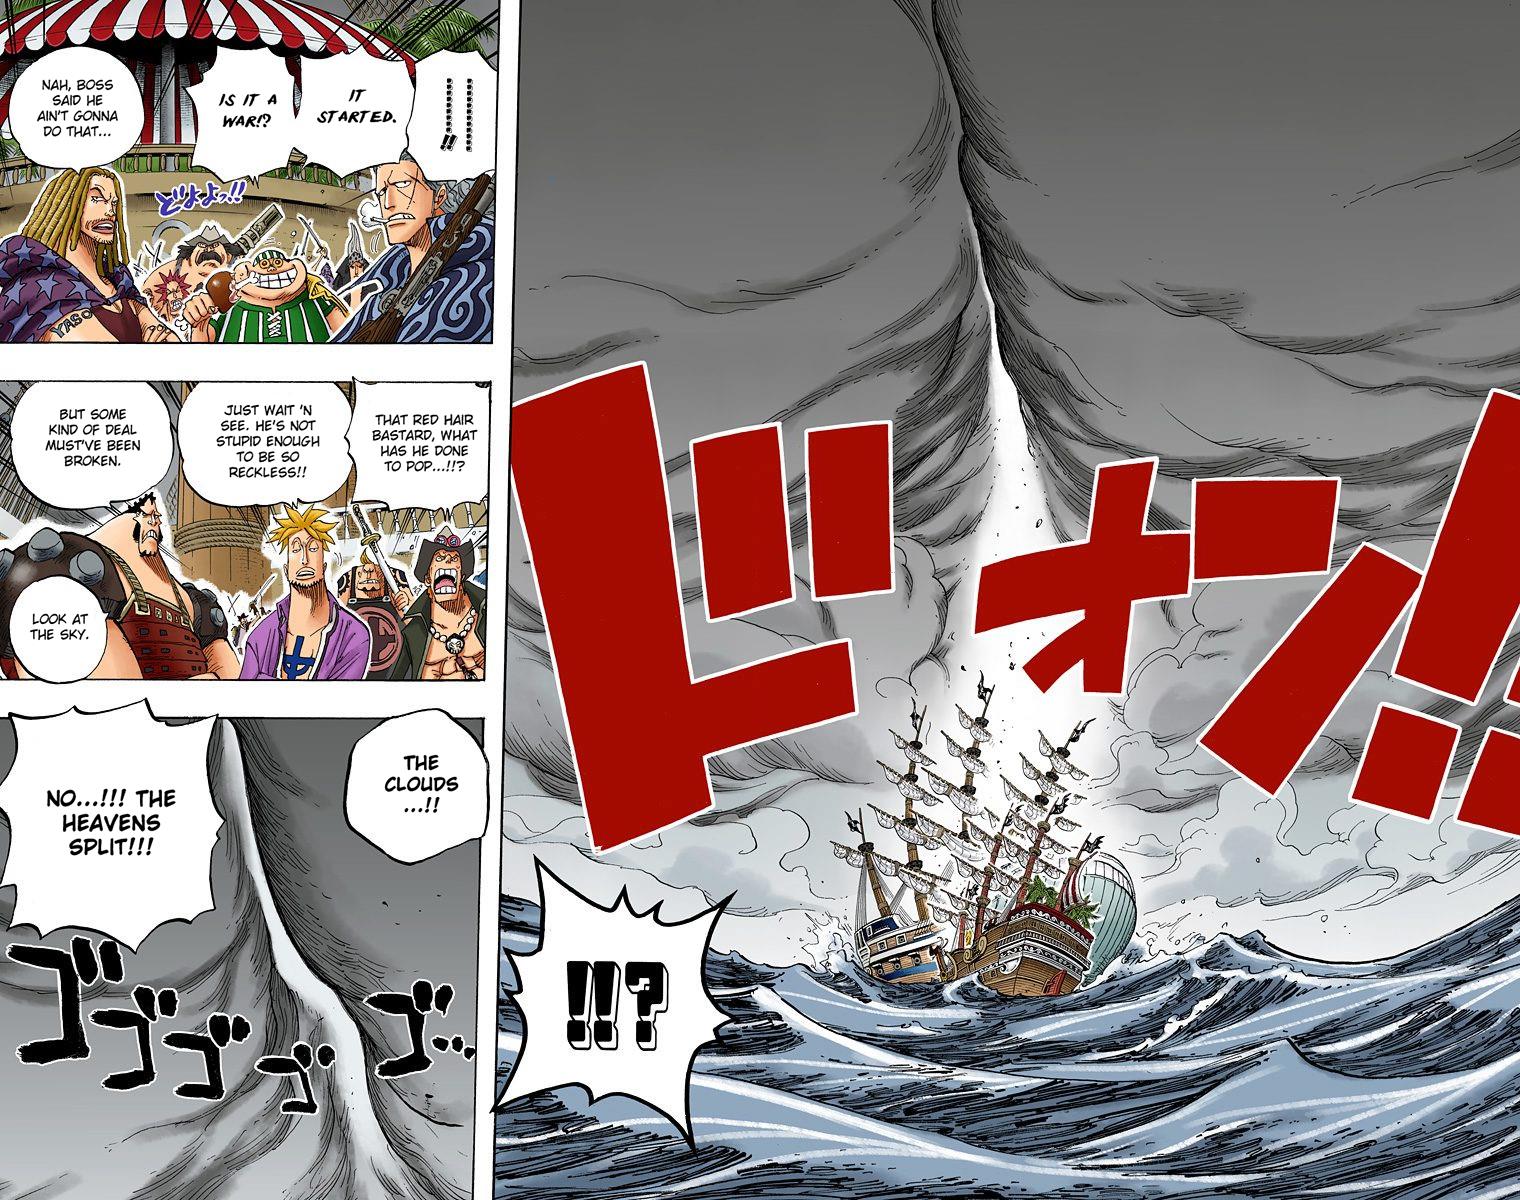 One Piece Chapter 434 Whitebeard And Red Hair Page 3 Of 3 One Piece Manga Online Colored